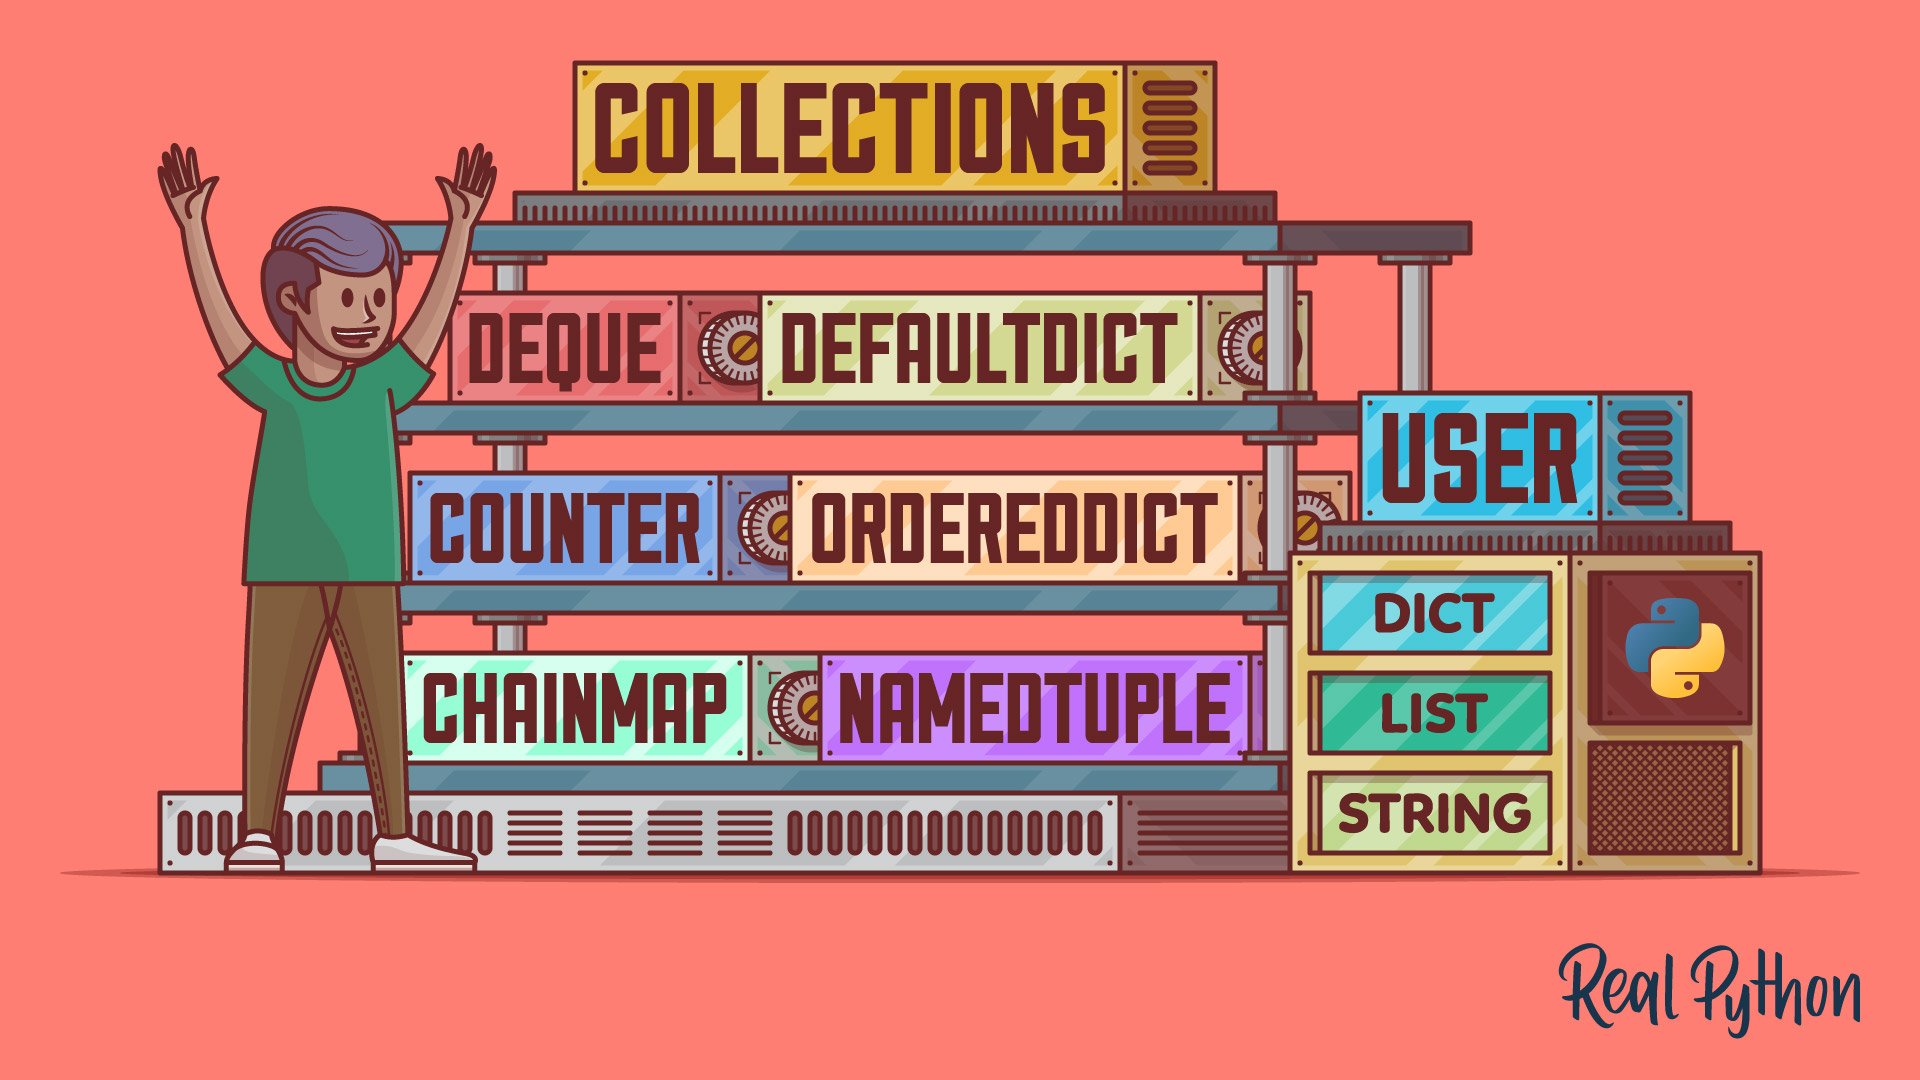 Python's collections: A Buffet of Specialized Data Types